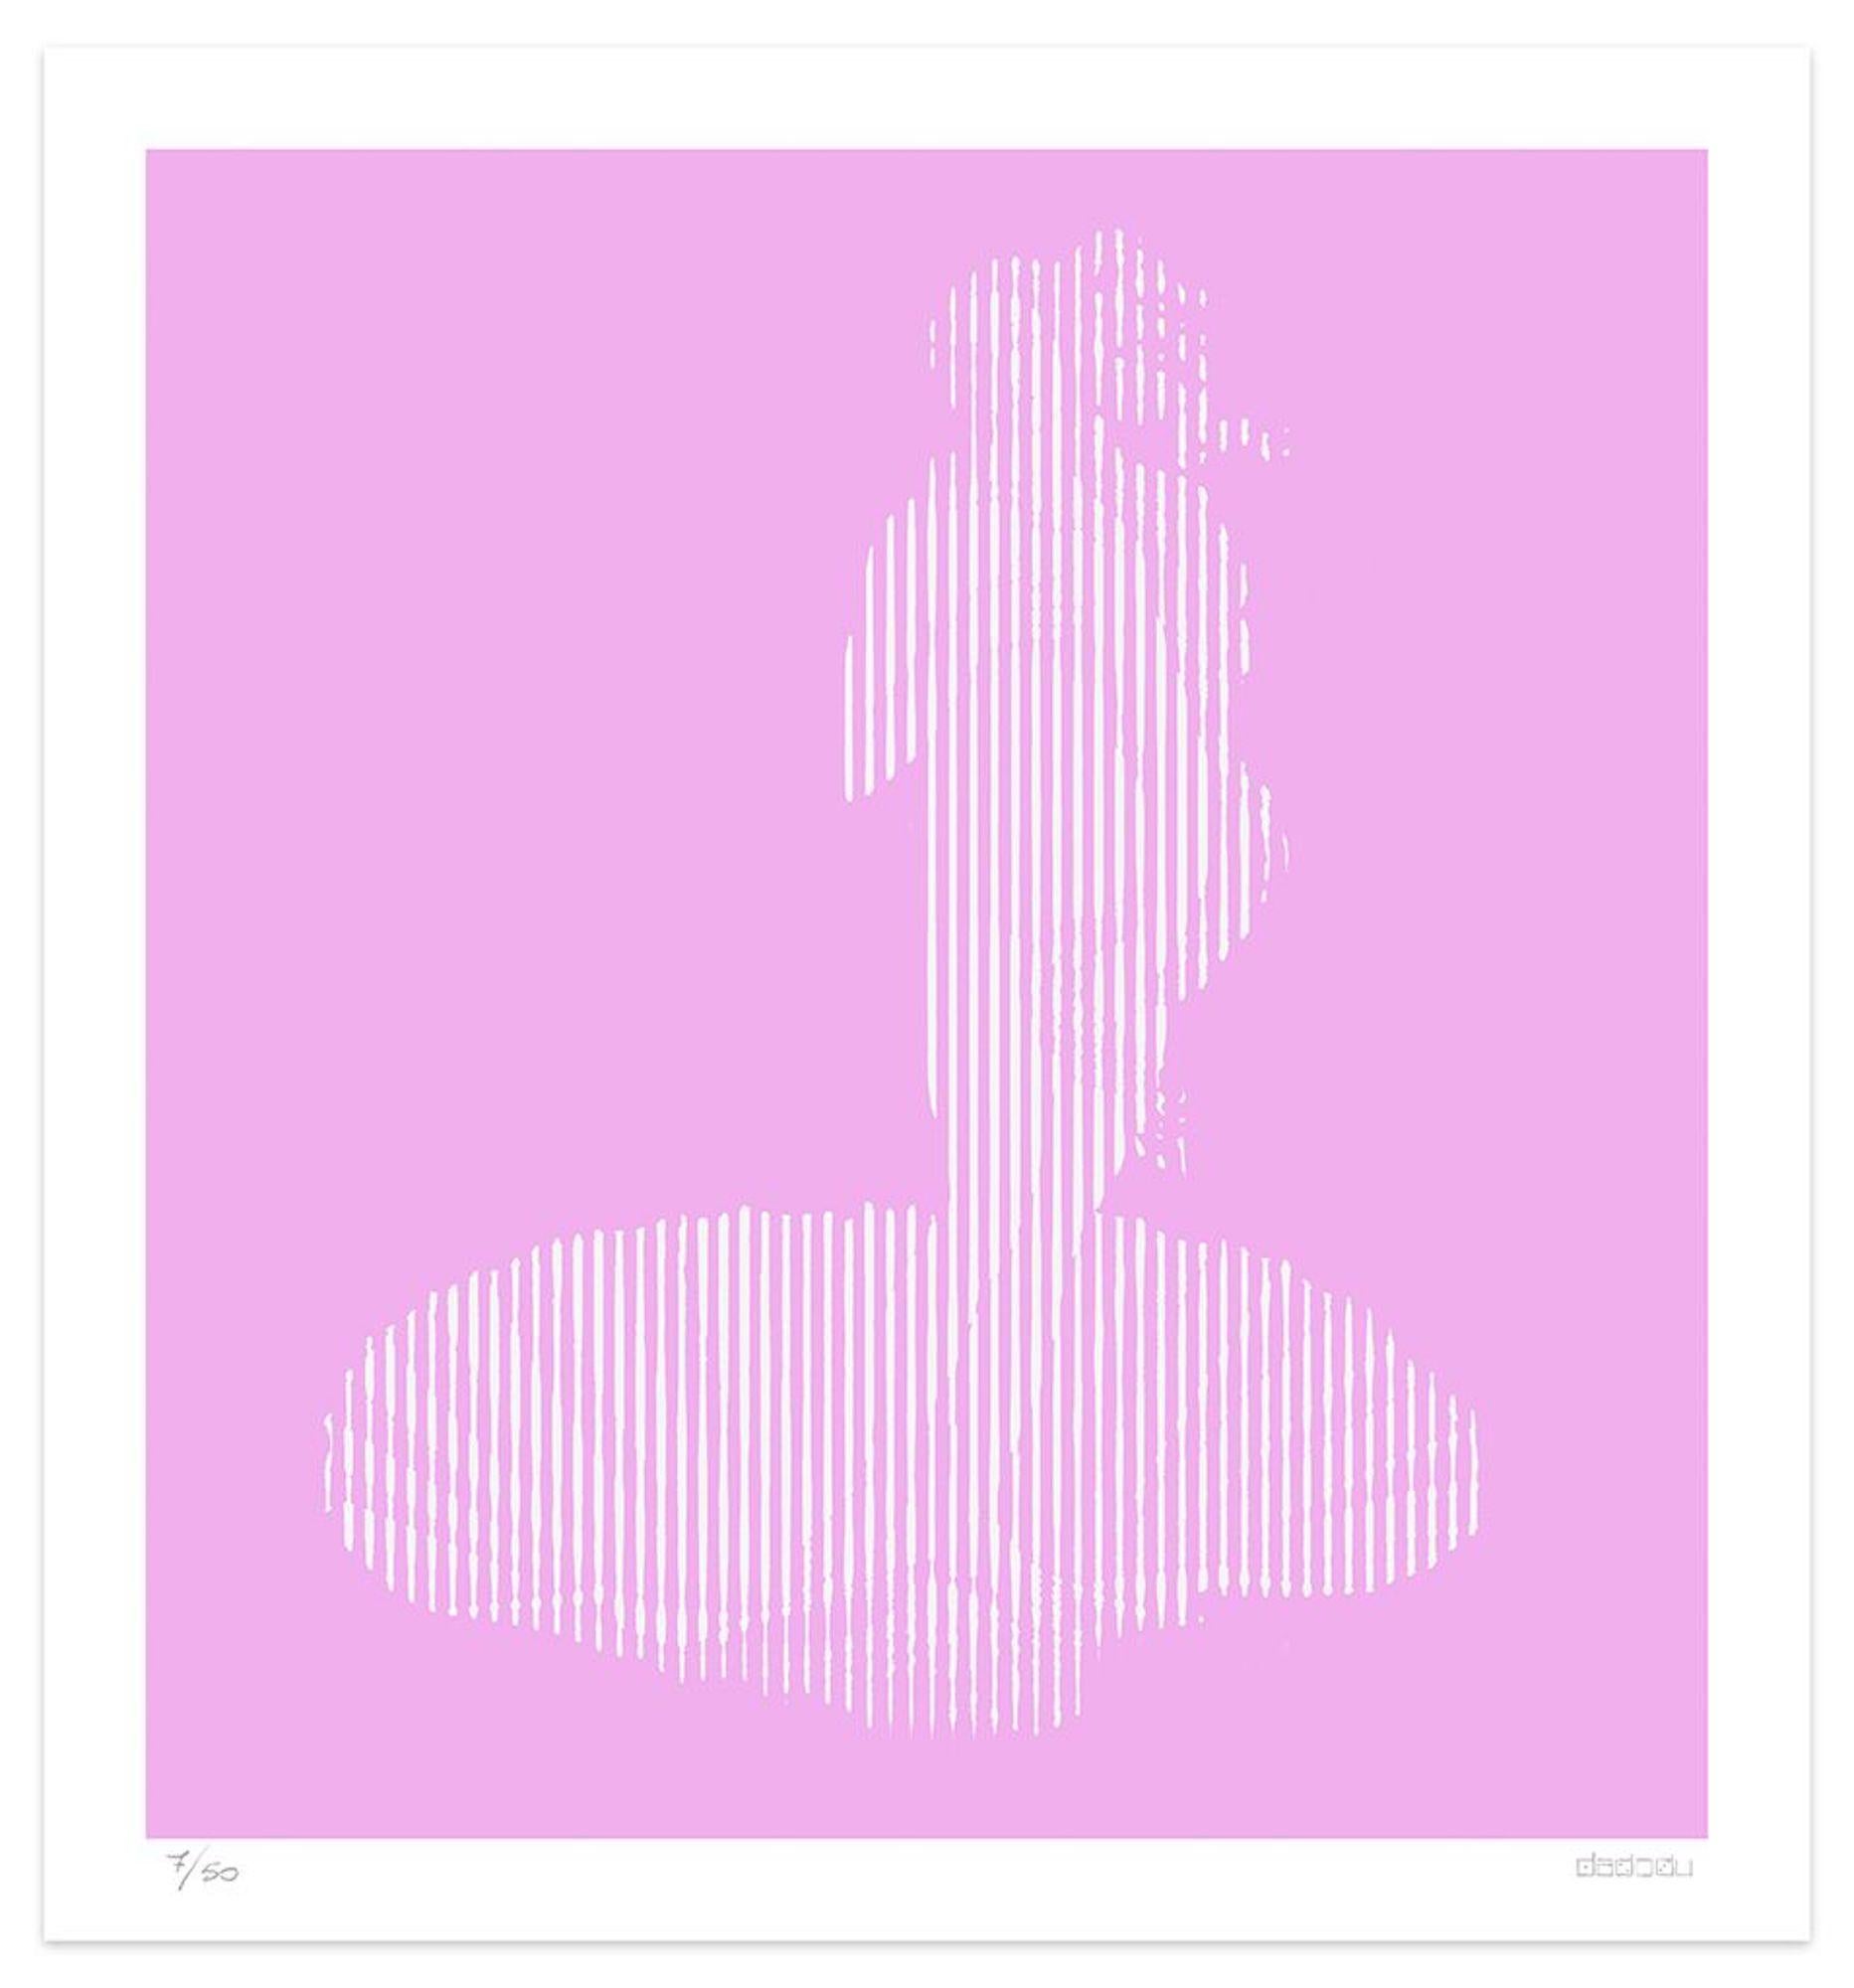 Image dimensions: 60 x 55.5 cm.

Pinkish Lines is an elegant giclée print realized by the contemporary artist Dadodu in 2016.

This original artwork represents The Birth of Venus by Sandro Botticelli with vertical white lines on a pink